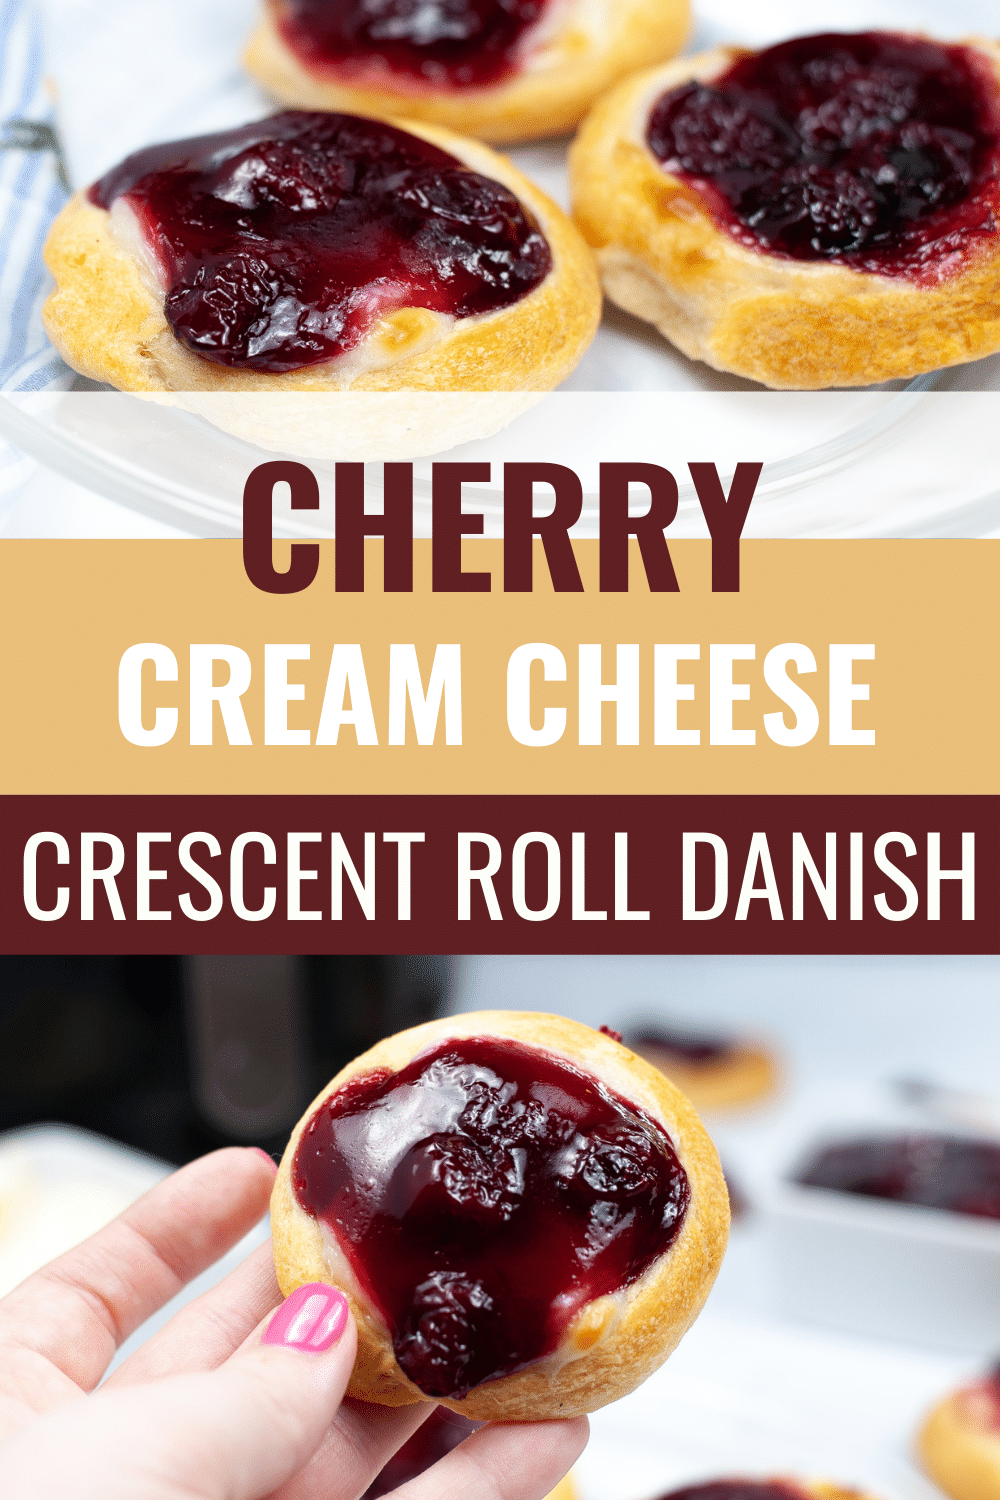 This Air Fryer Cherry Cream Cheese Crescent Roll Danish Recipe is easy to make and so delicious. It's the perfect breakfast or snack recipe. #airfryer #cherry #creamcheese #crescentroll #danish via @wondermomwannab